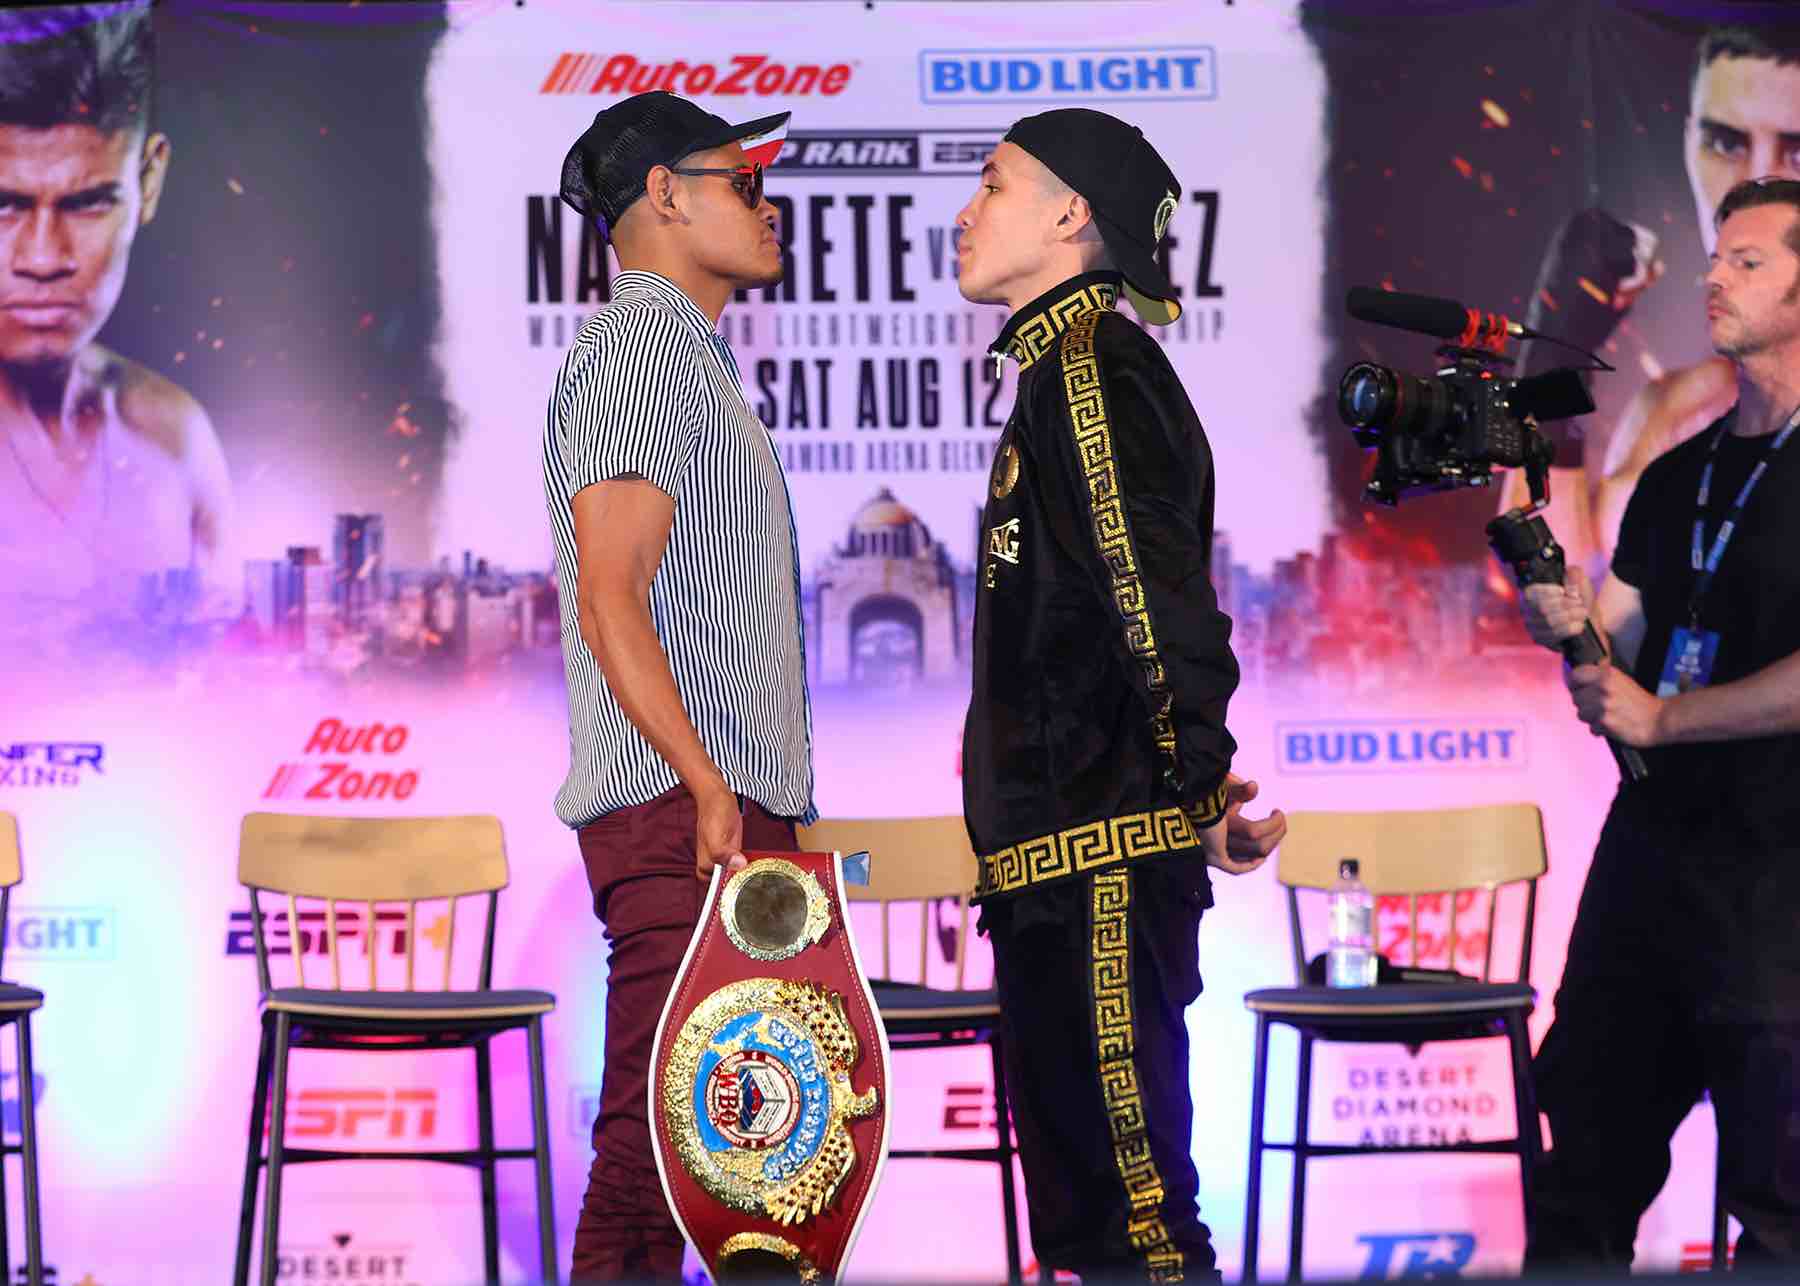 Navarette and Valdez’s all-time great battle proved to be a Barrera-Morales for the modern era